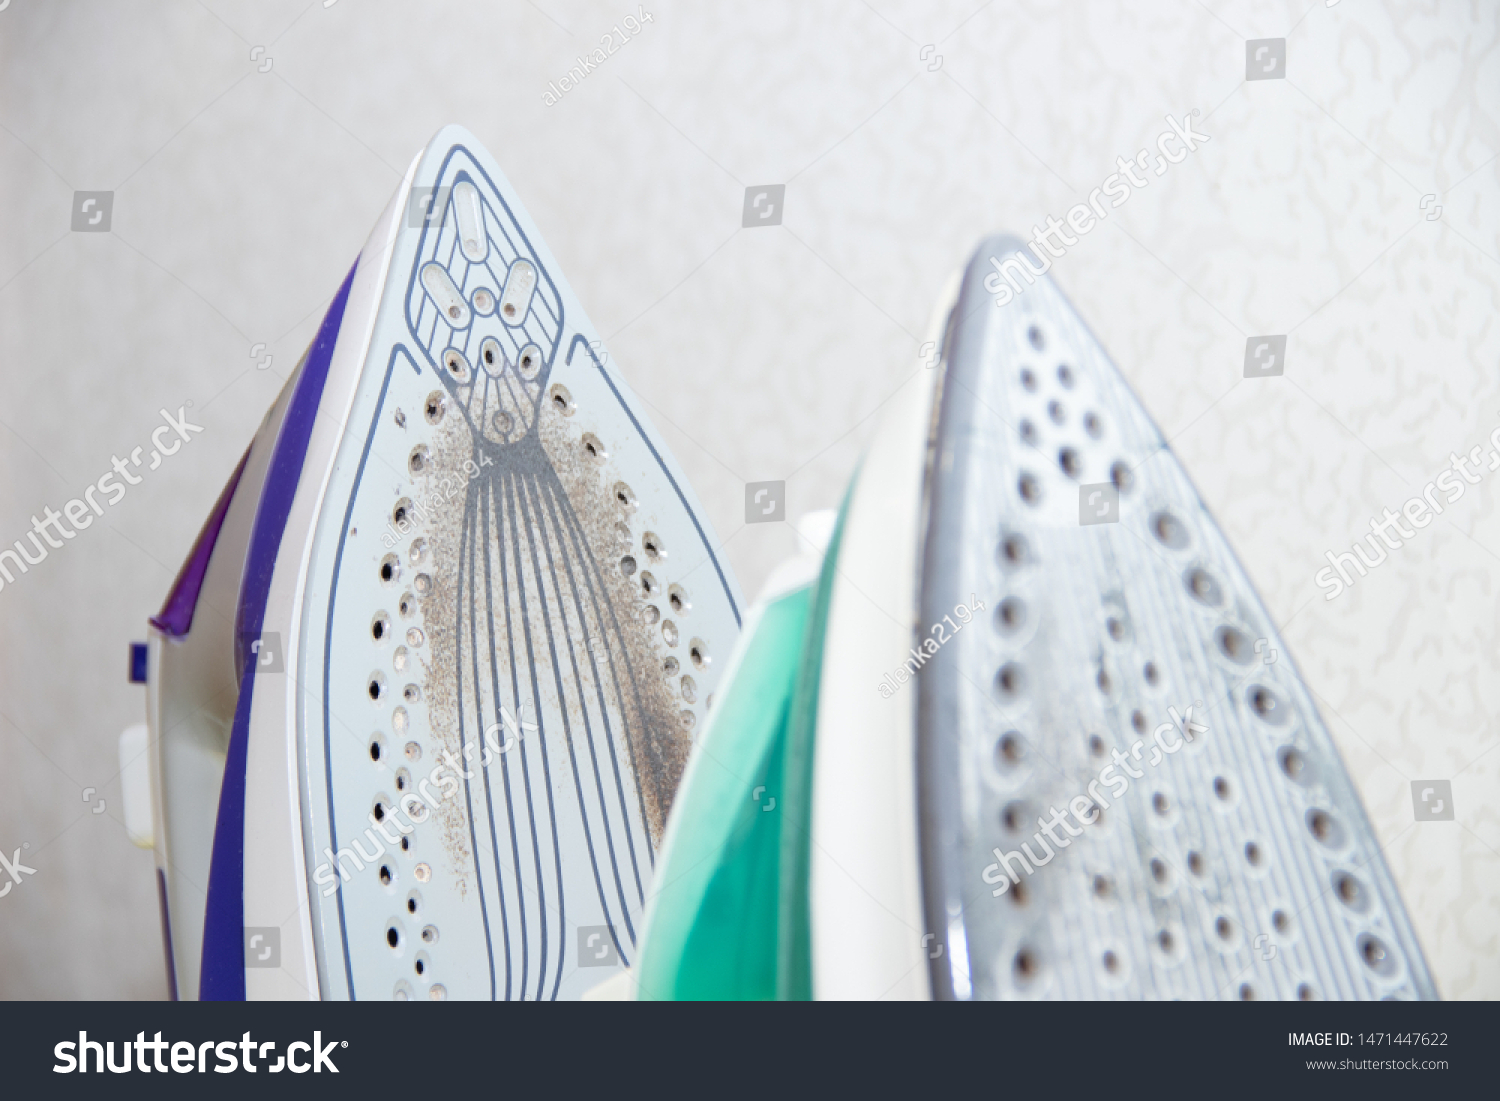 Two irons on an ironing board. Selection and comparison of irons. Ironing board. #1471447622